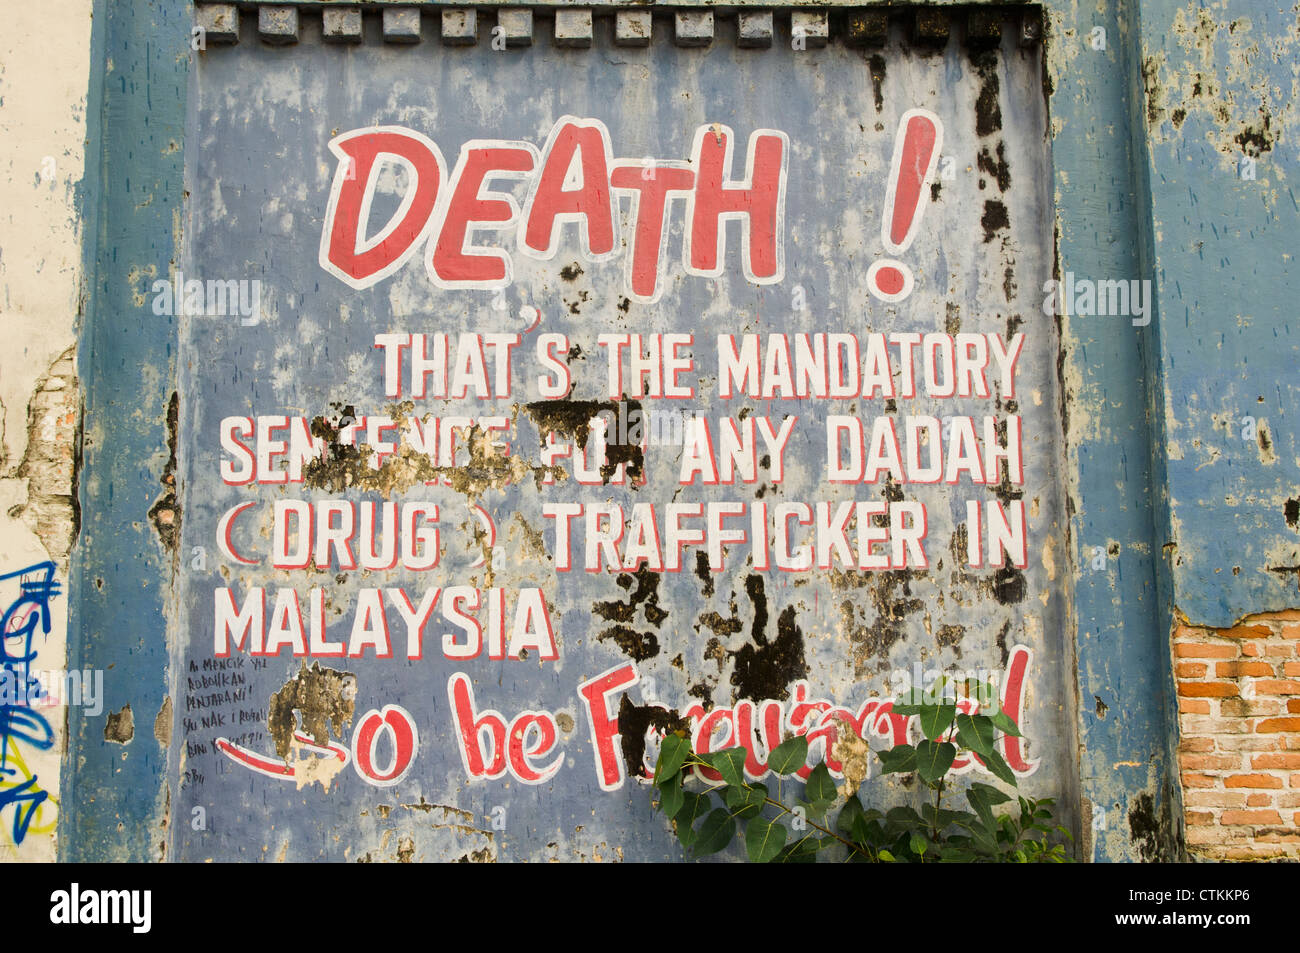 The Pudu Prison was a prison in Kuala Lumpur, Malaysia. Drawing on the wall for message of death sentences for drug trafficker. Stock Photo